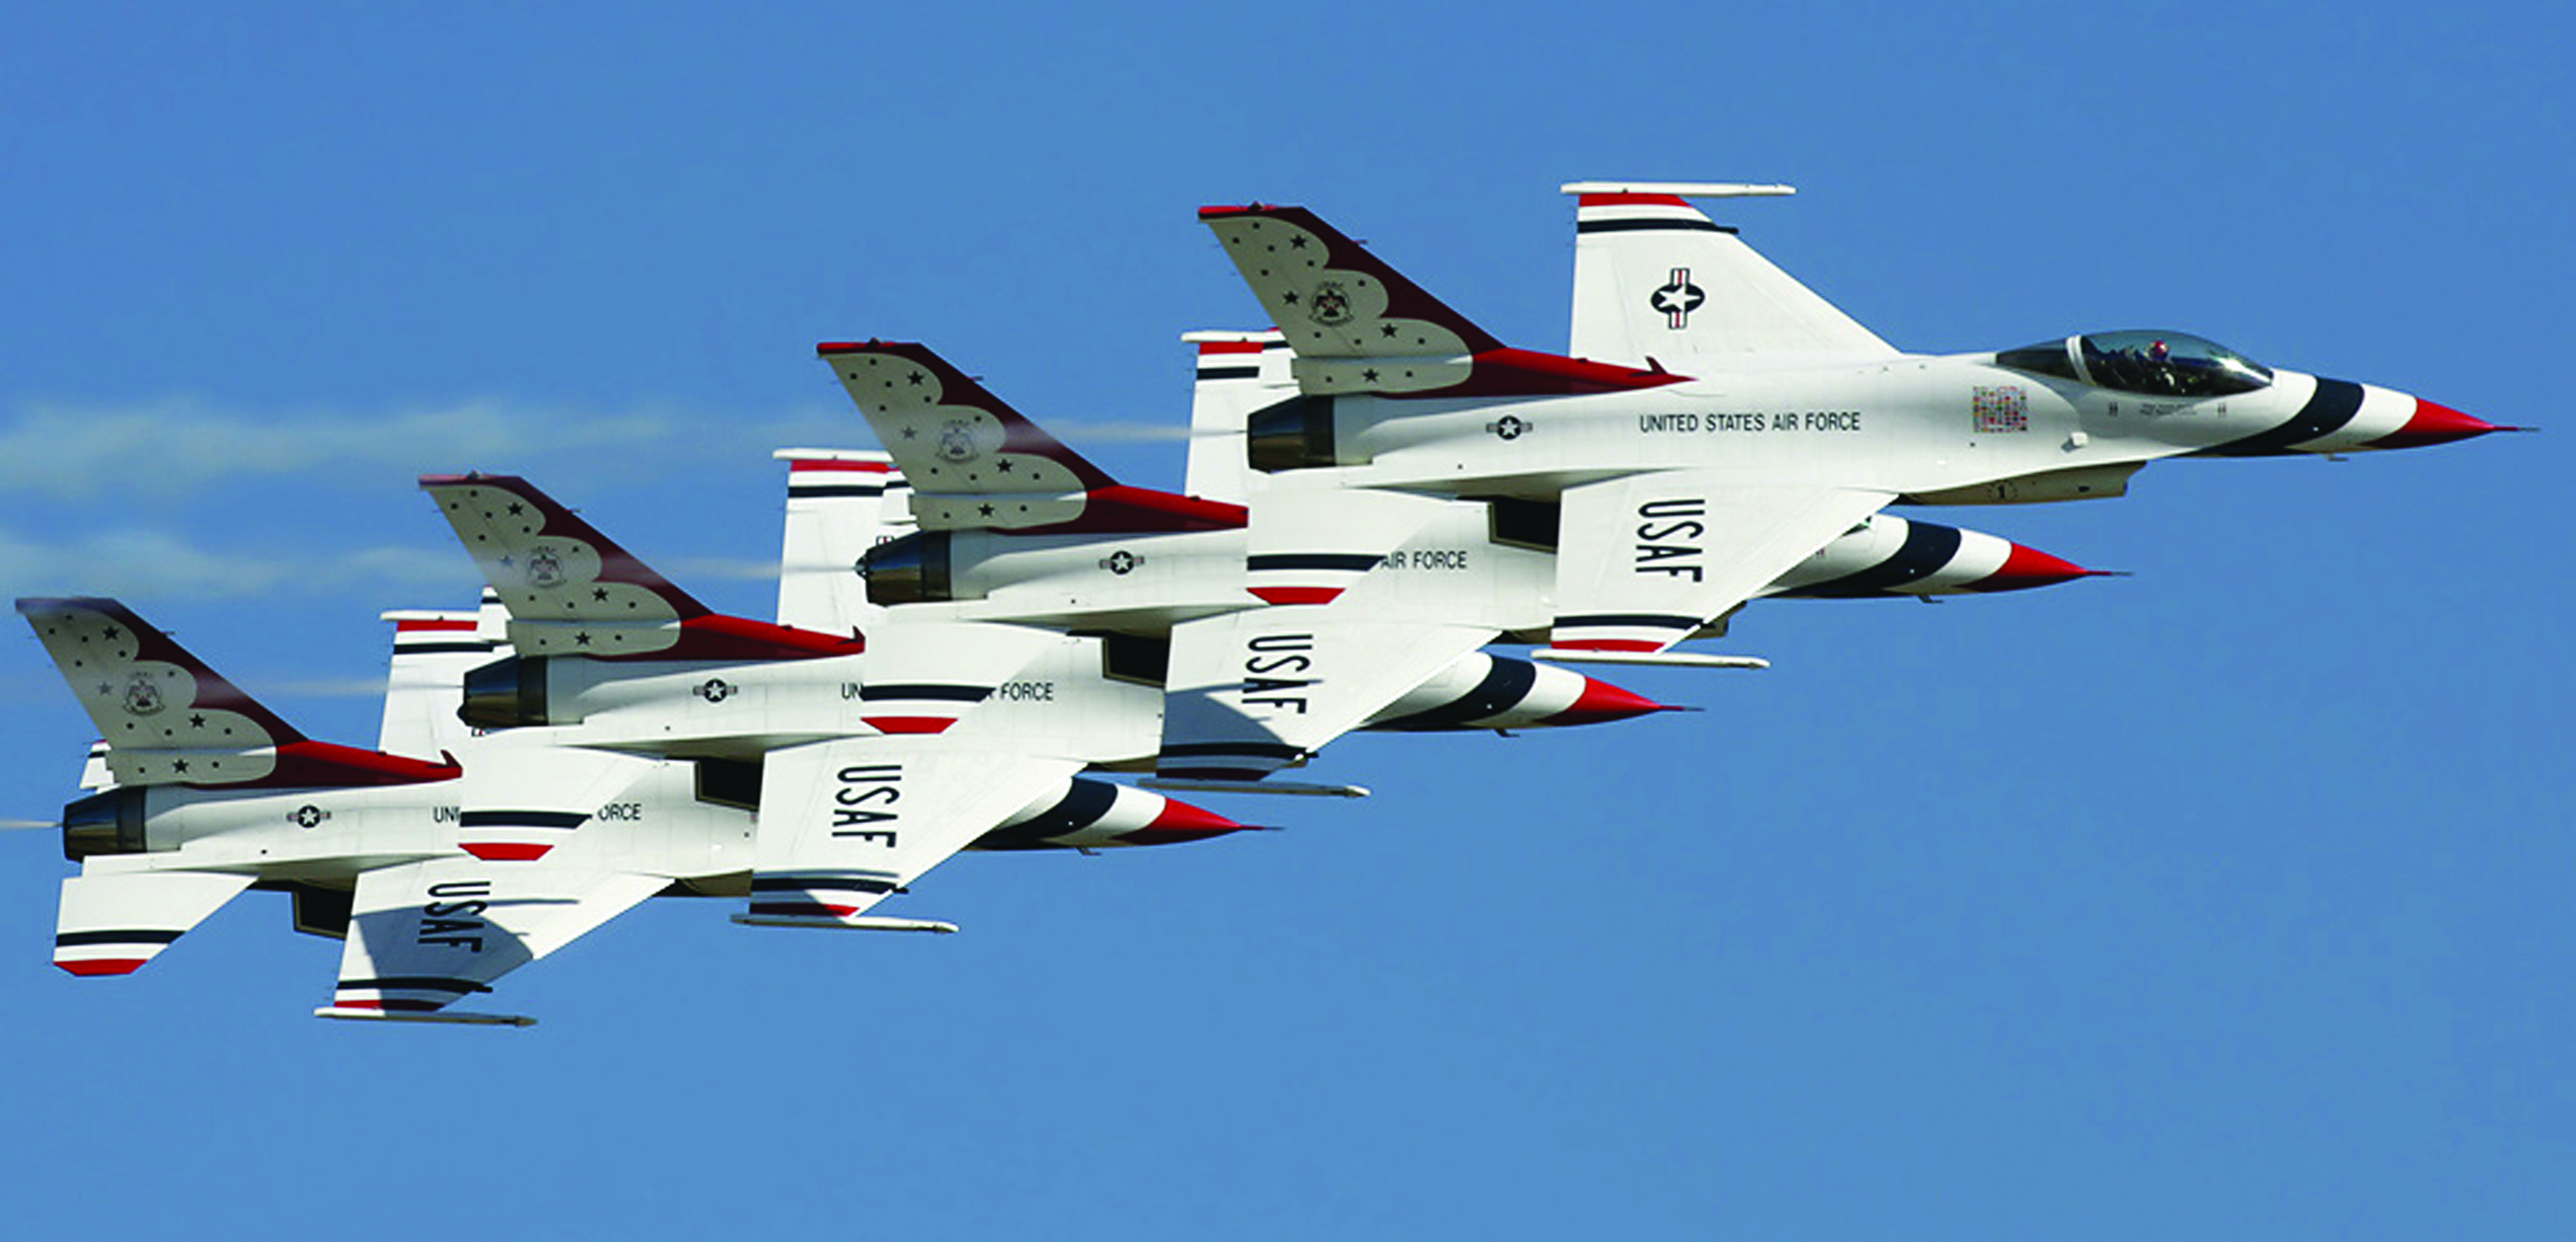 United States Air Force Thunderbirds HD wallpapers, Desktop wallpaper - most viewed